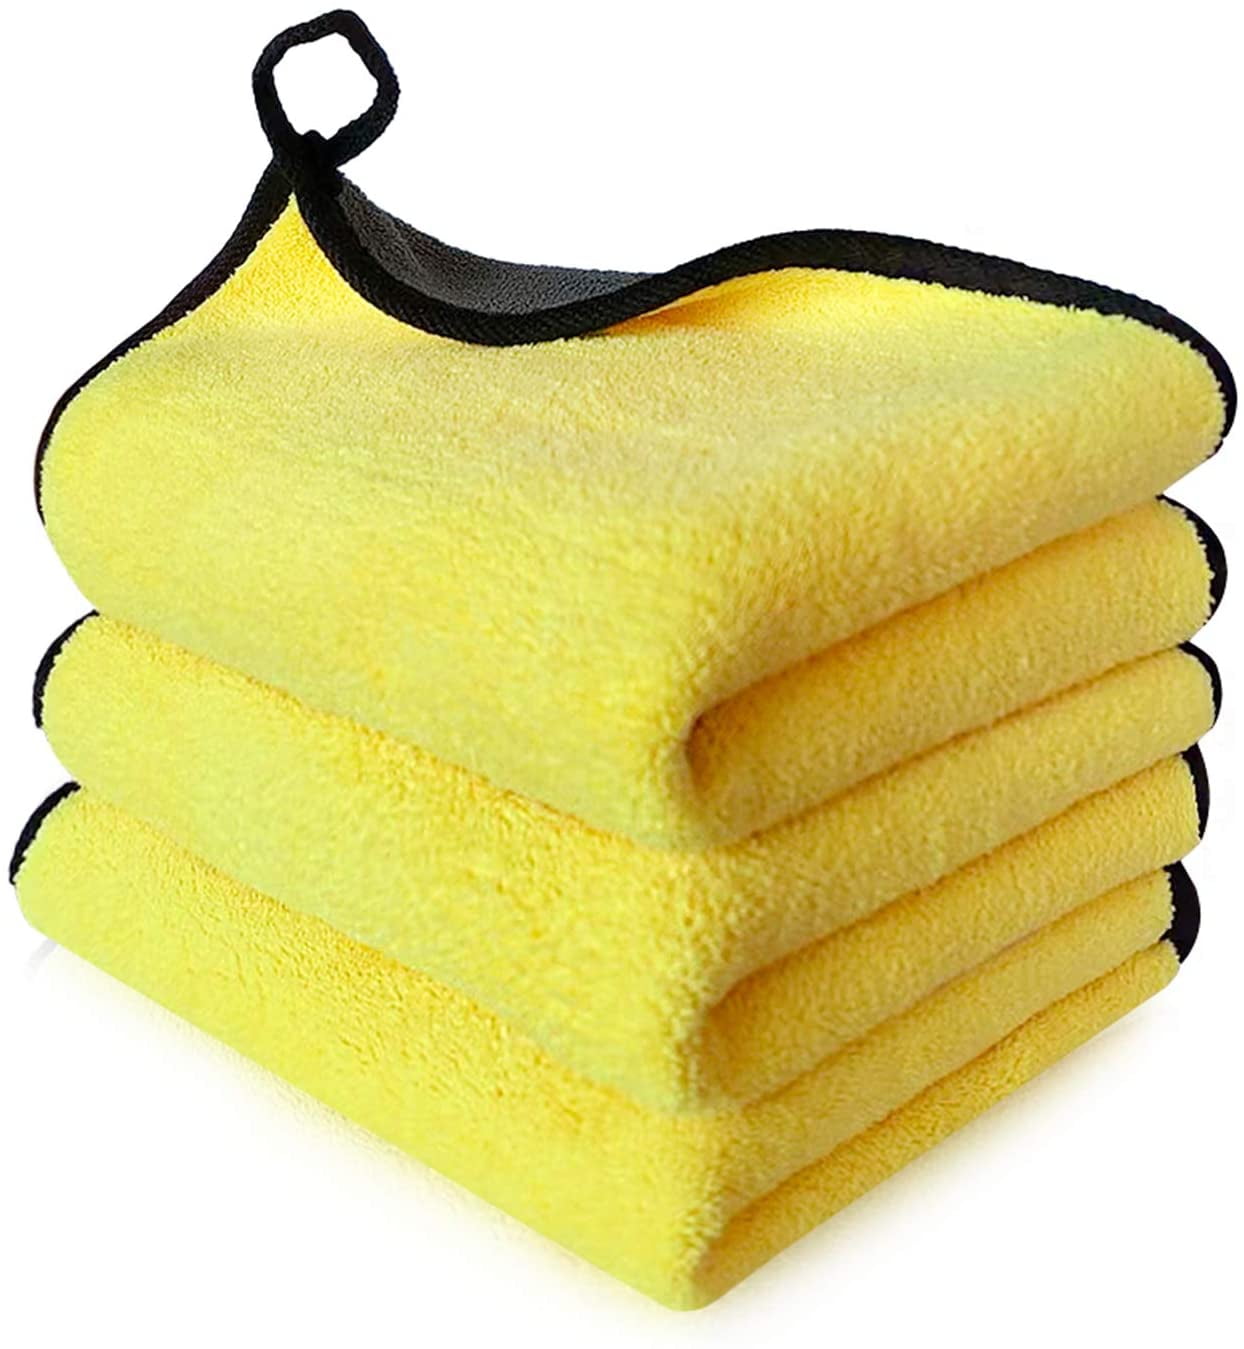 Super Soft Microfiber Absorbent Towel Car Household Washing Cleaning Wash Cloth 